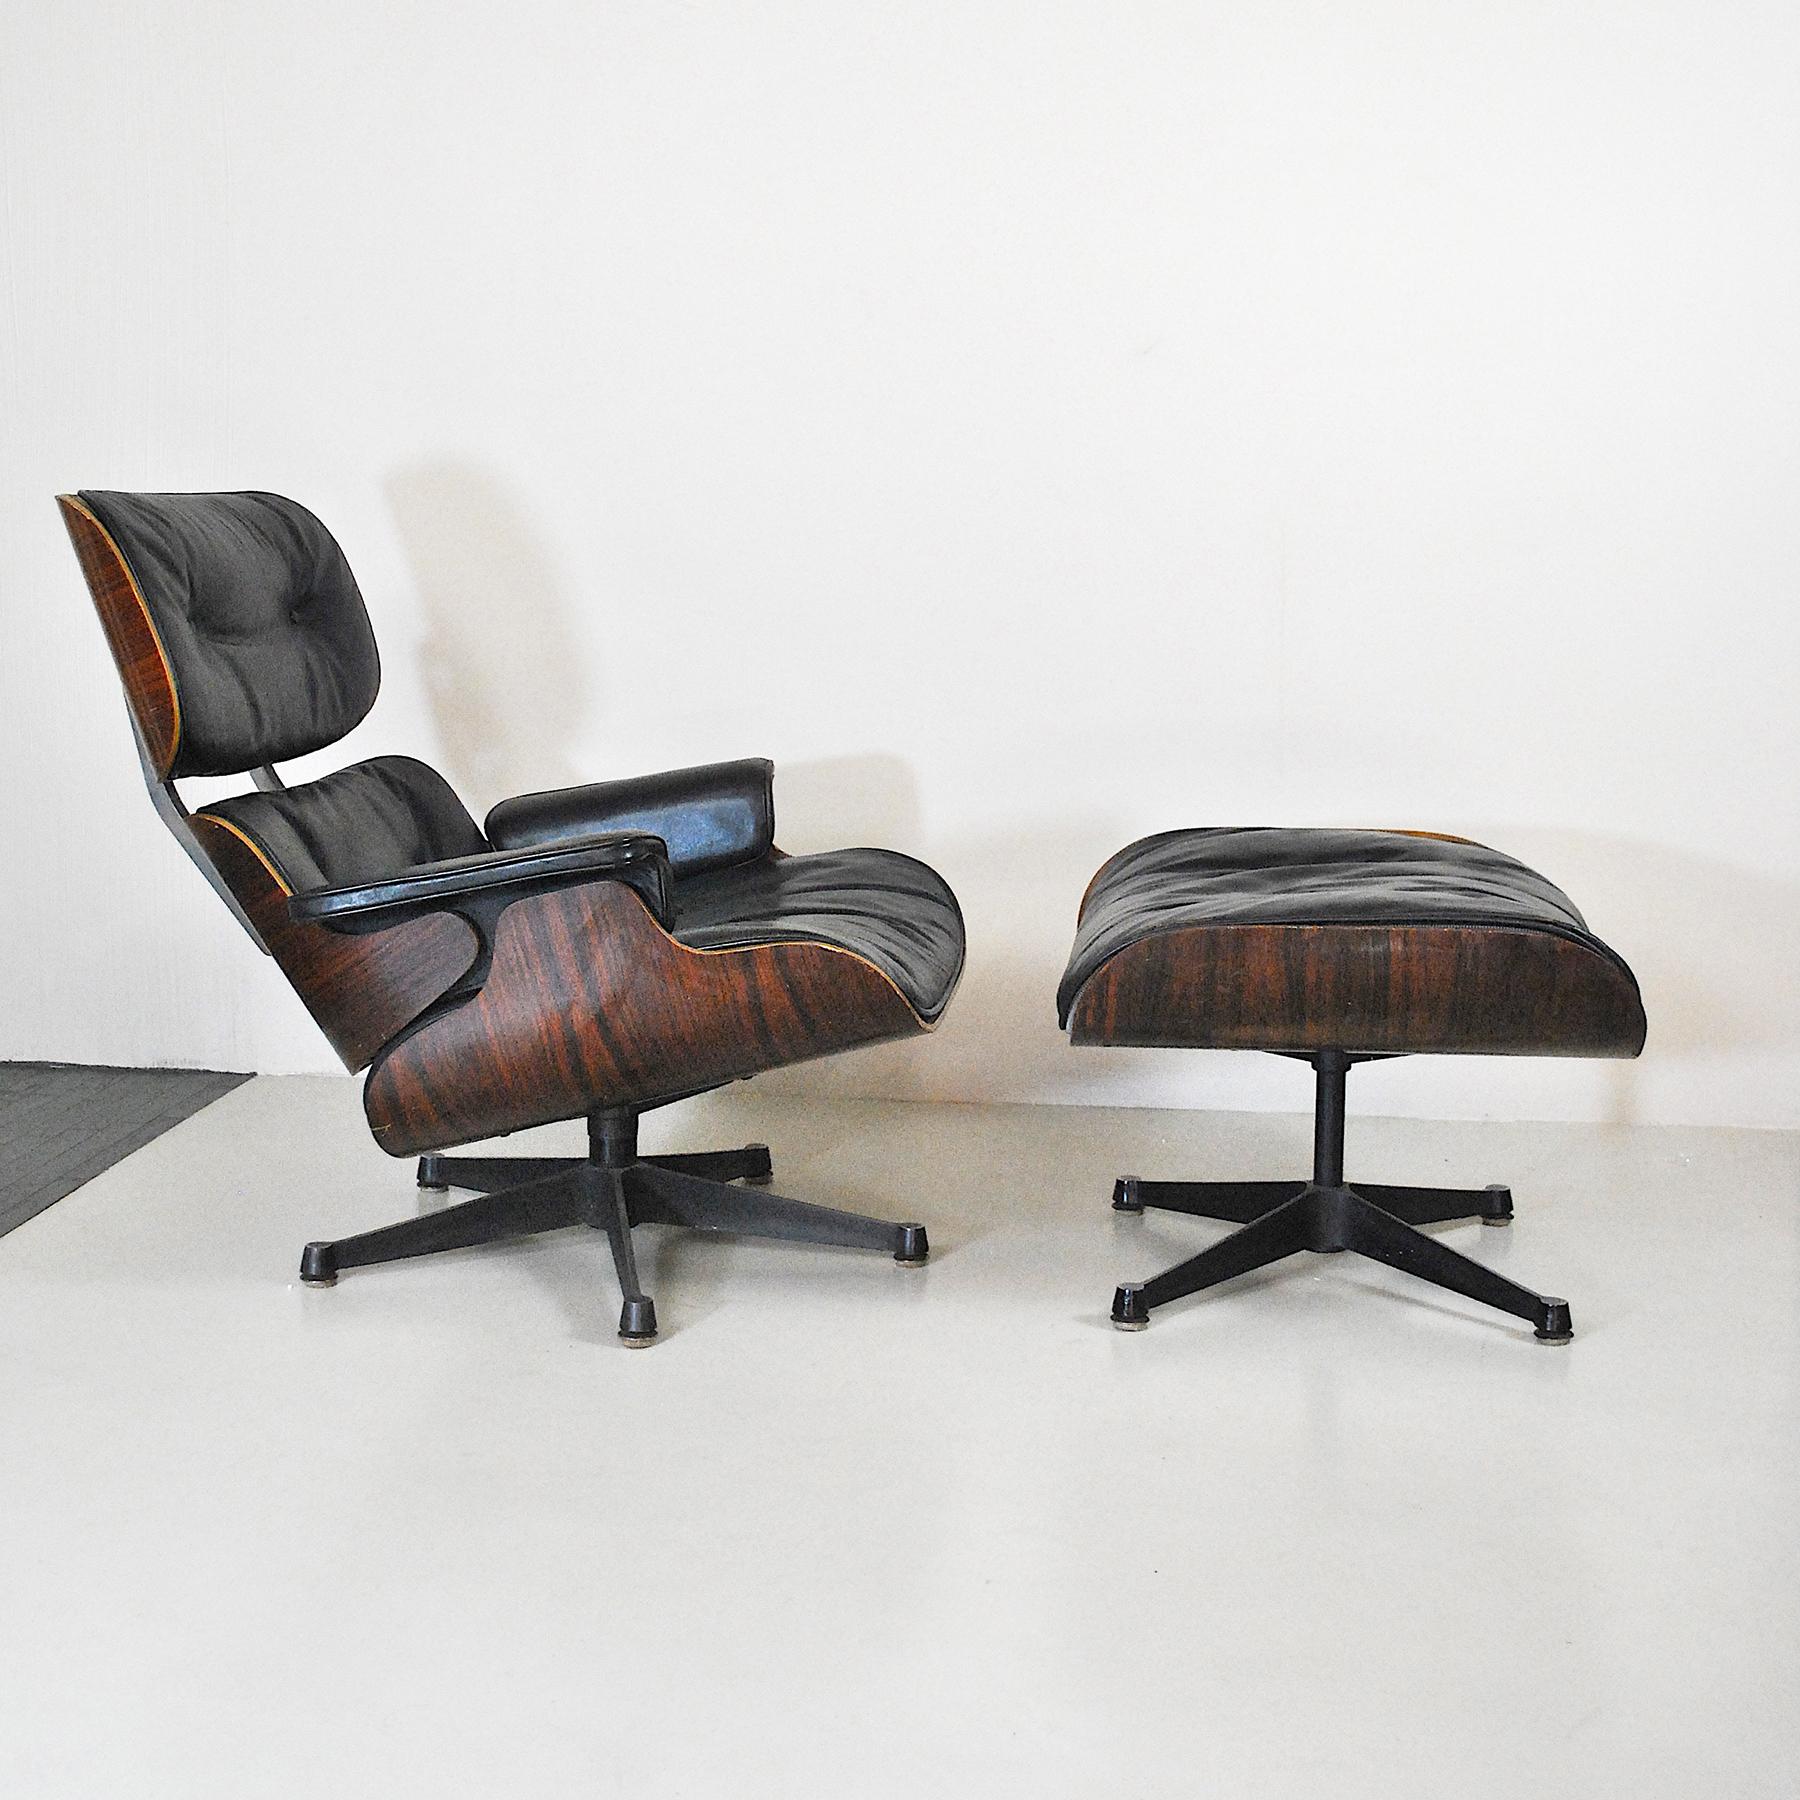 Mid-20th Century Charles Eames Lounge Chair and Ottomana for Herman Miller